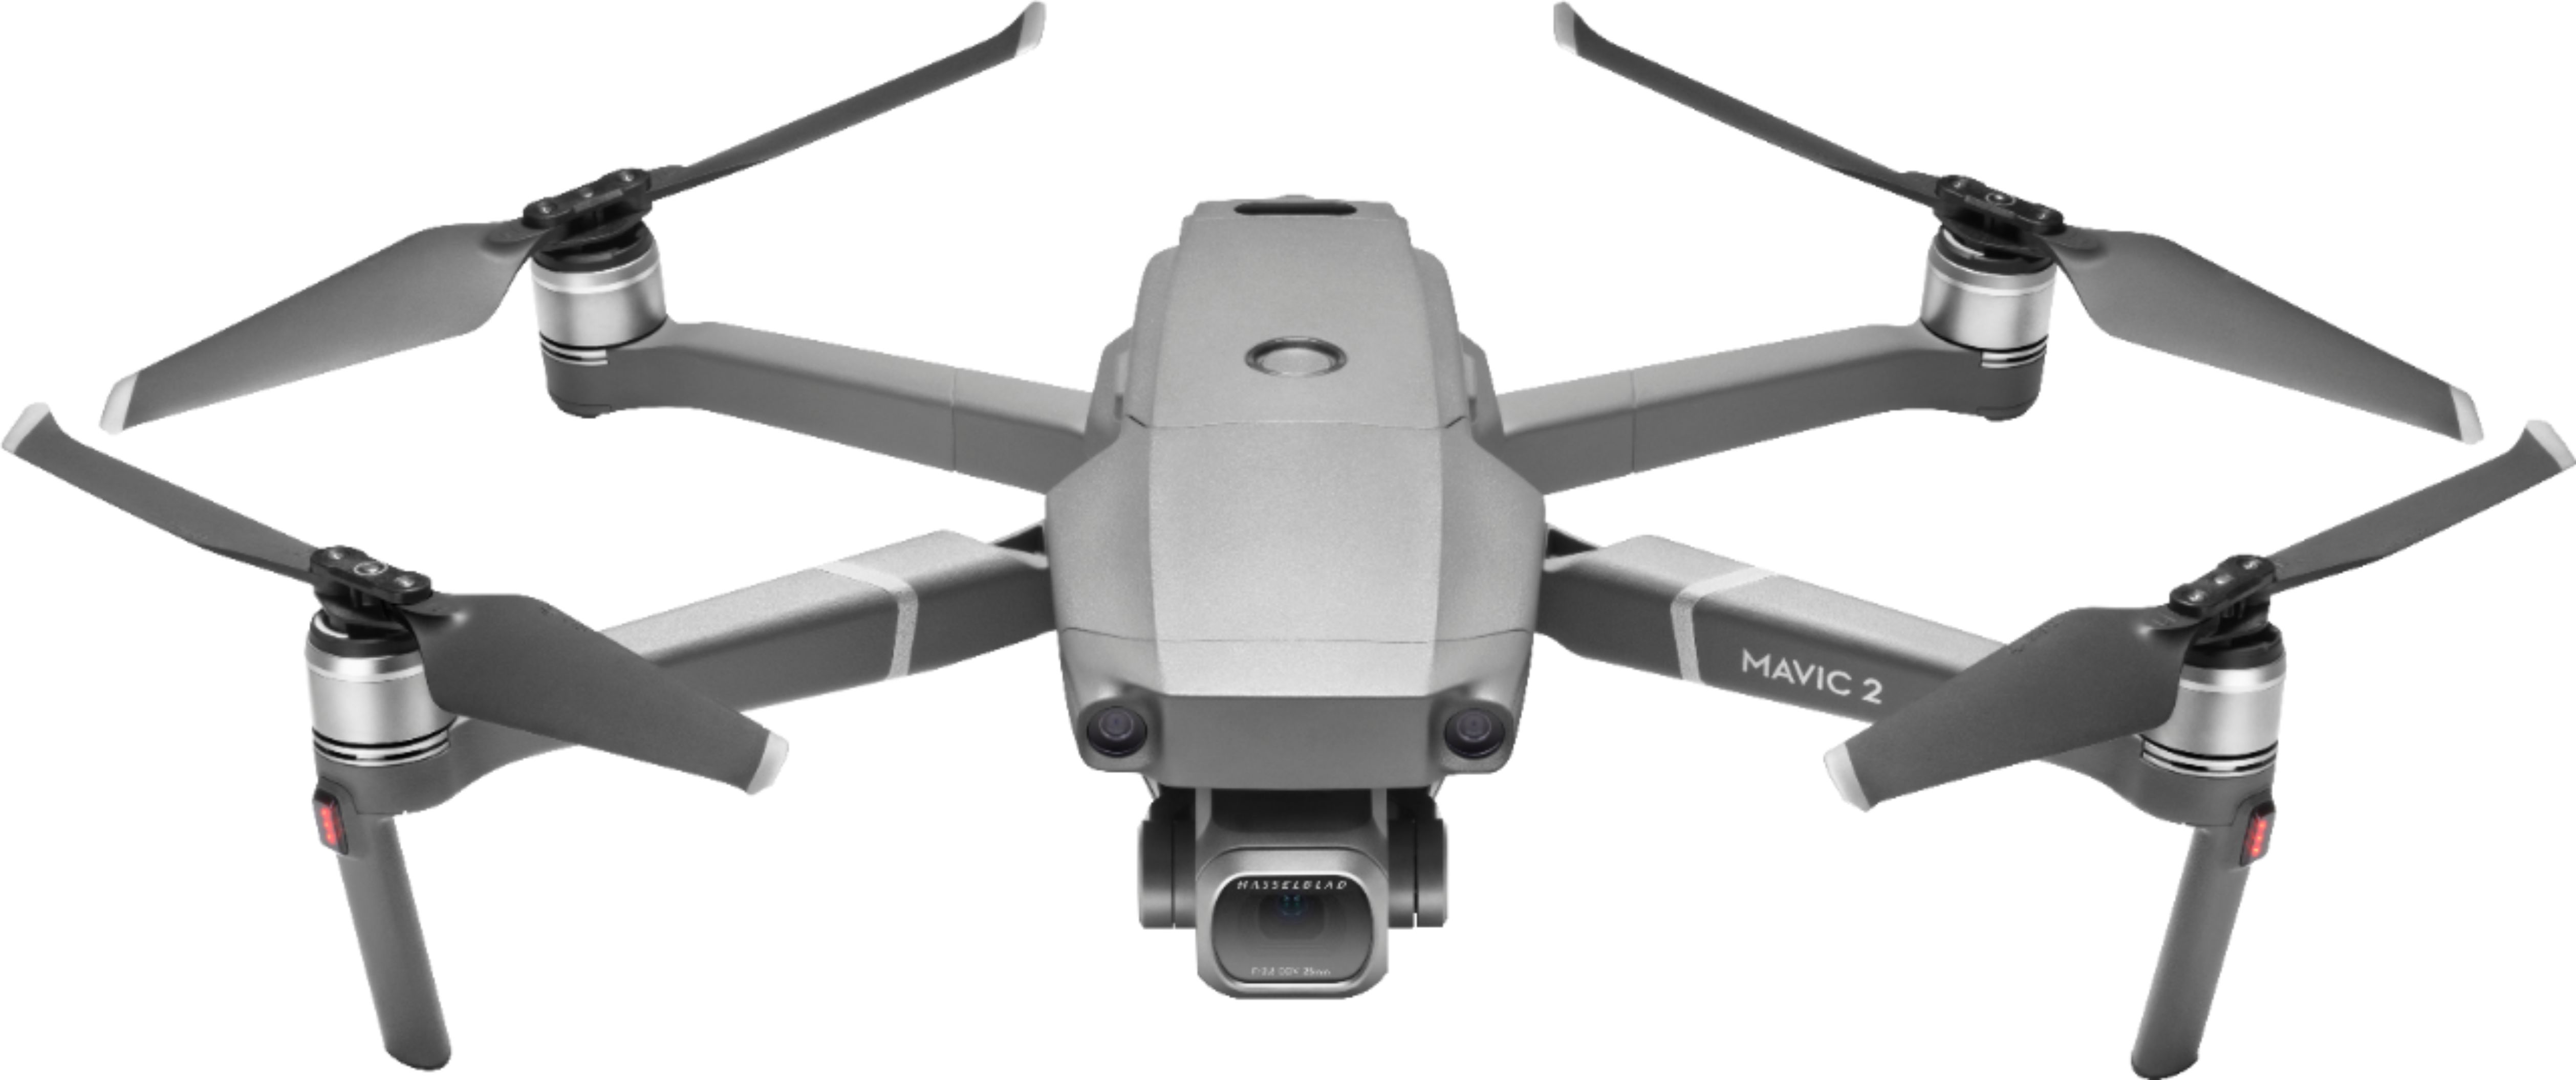 Best Buy: DJI Mavic 2 Pro Quadcopter with Remote Controller Gray 